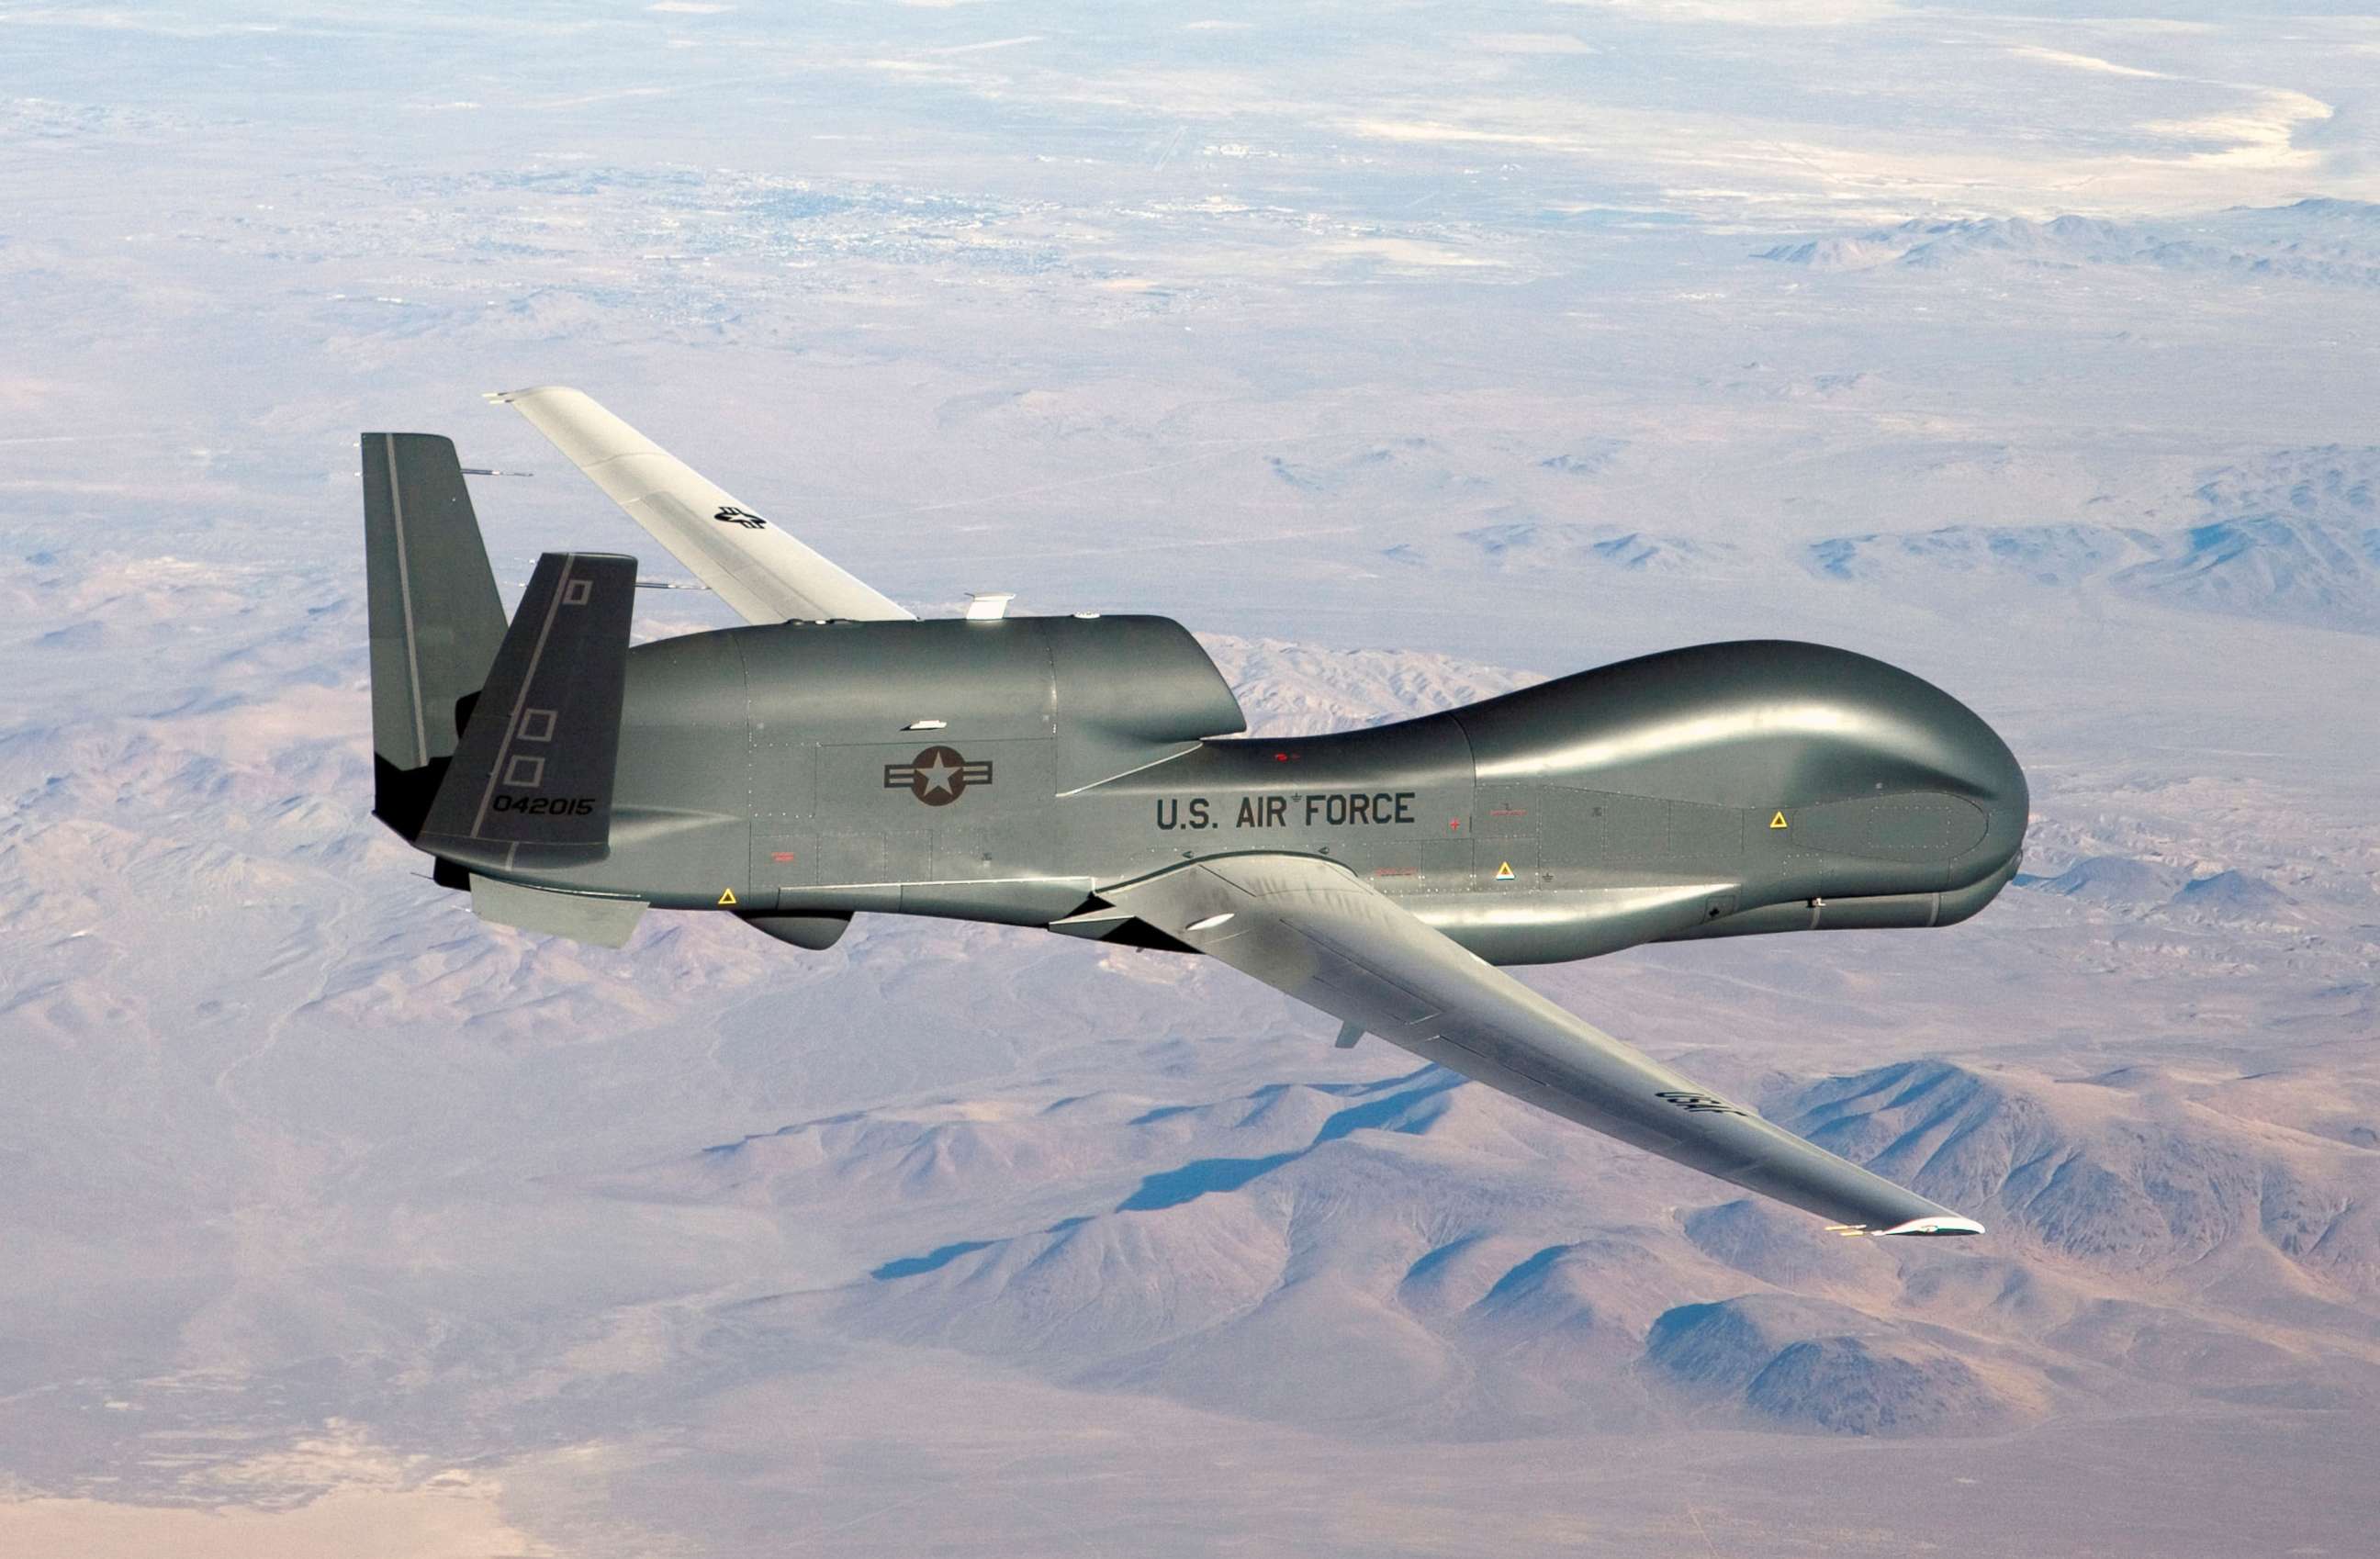 PHOTO: An undated U.S. Air Force handout photo of a RQ-4 Global Hawk unmanned (drone) aircraft.